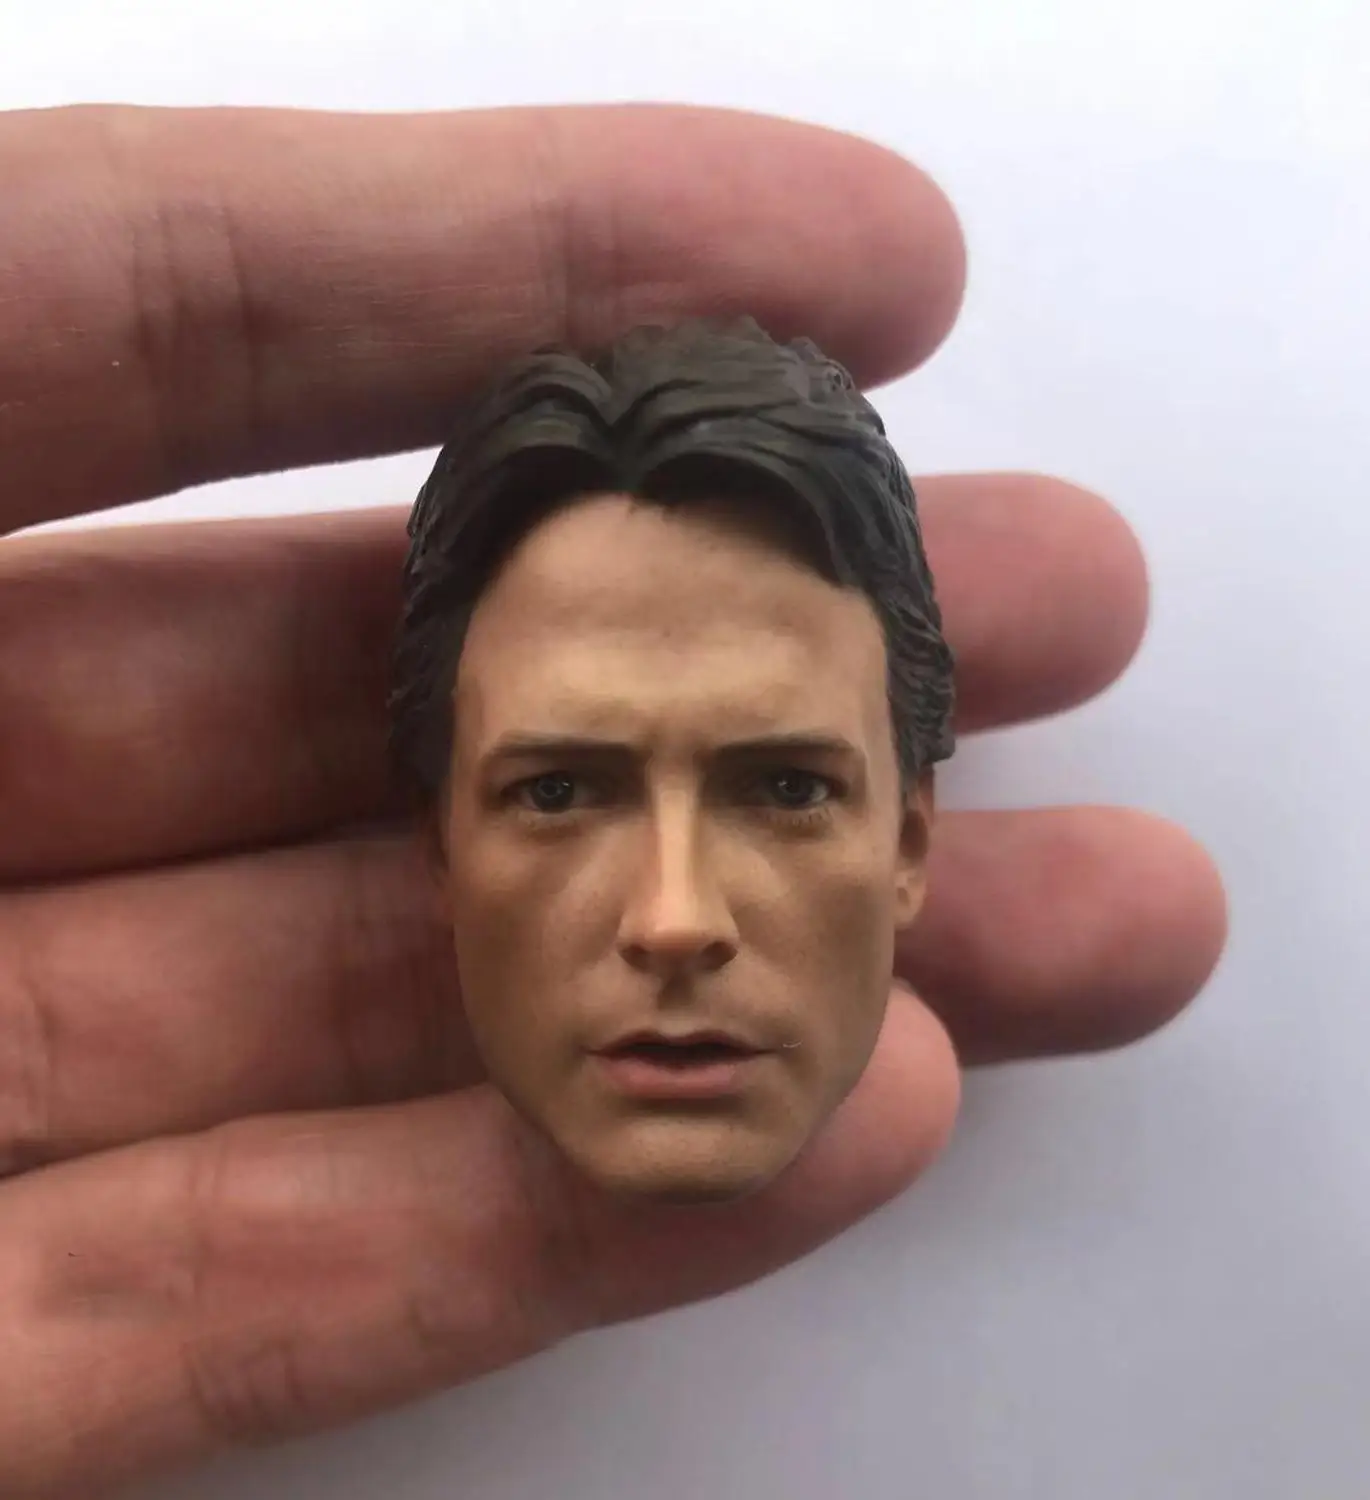 

1/6 scale male figure doll accessories Michael J. Fox Back To The Future Marty McFly head sculpt for 12" Action figure doll A060